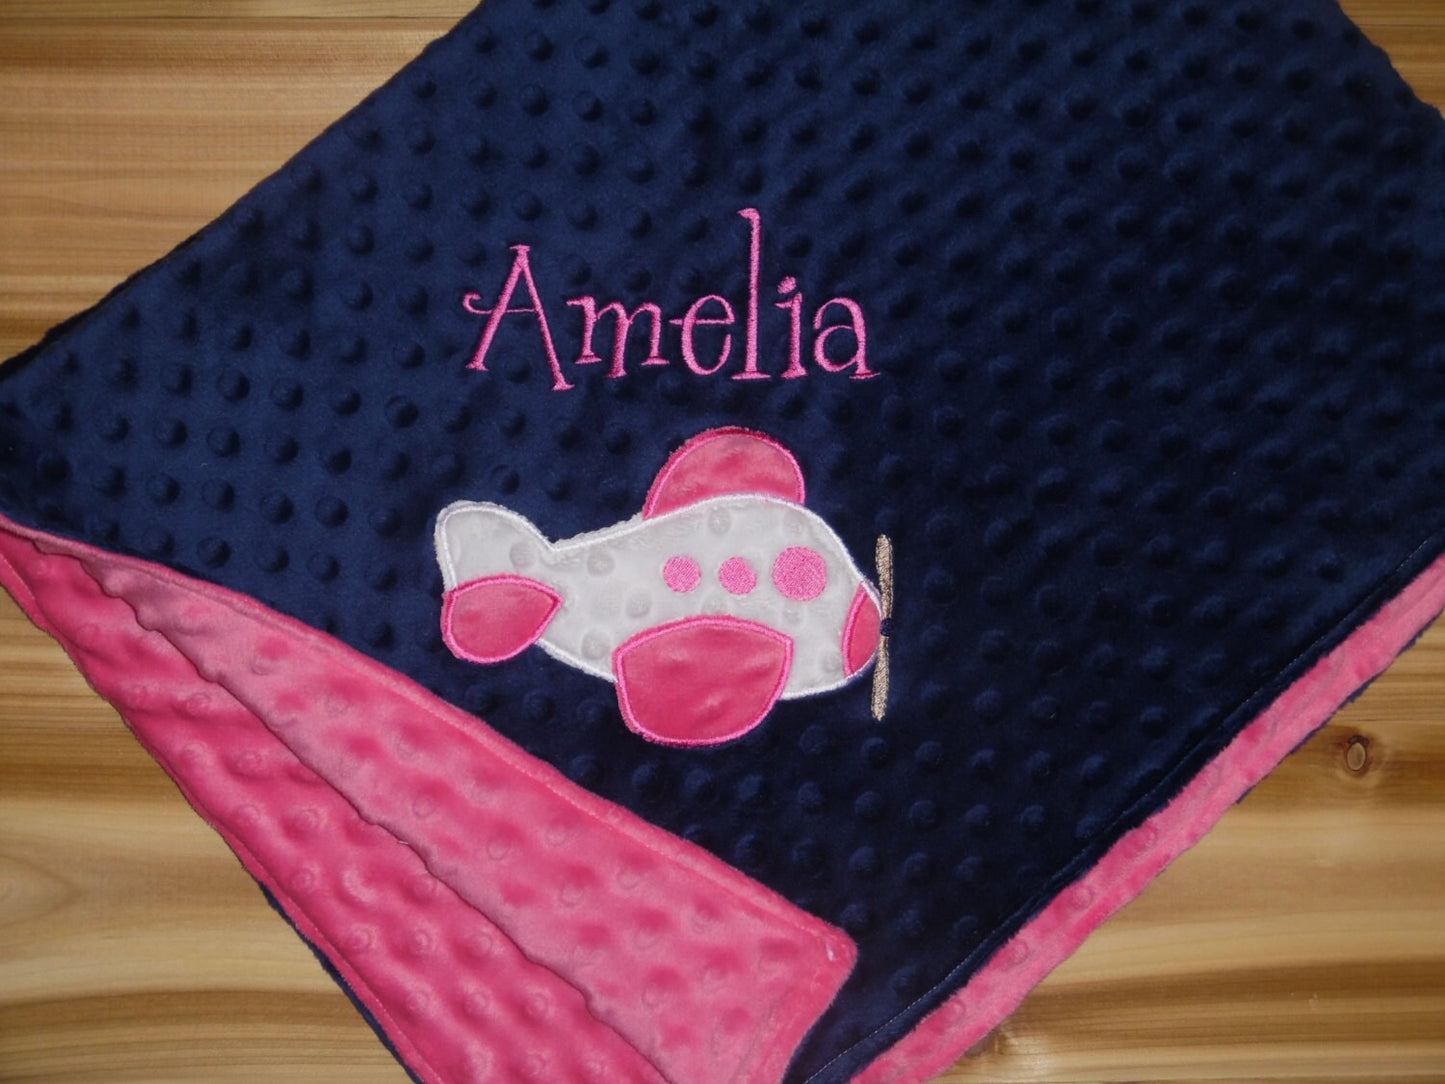 Airplane - Personalized Minky Blanket - Hot Pink / Navy  Minky - Embroidered Airplane